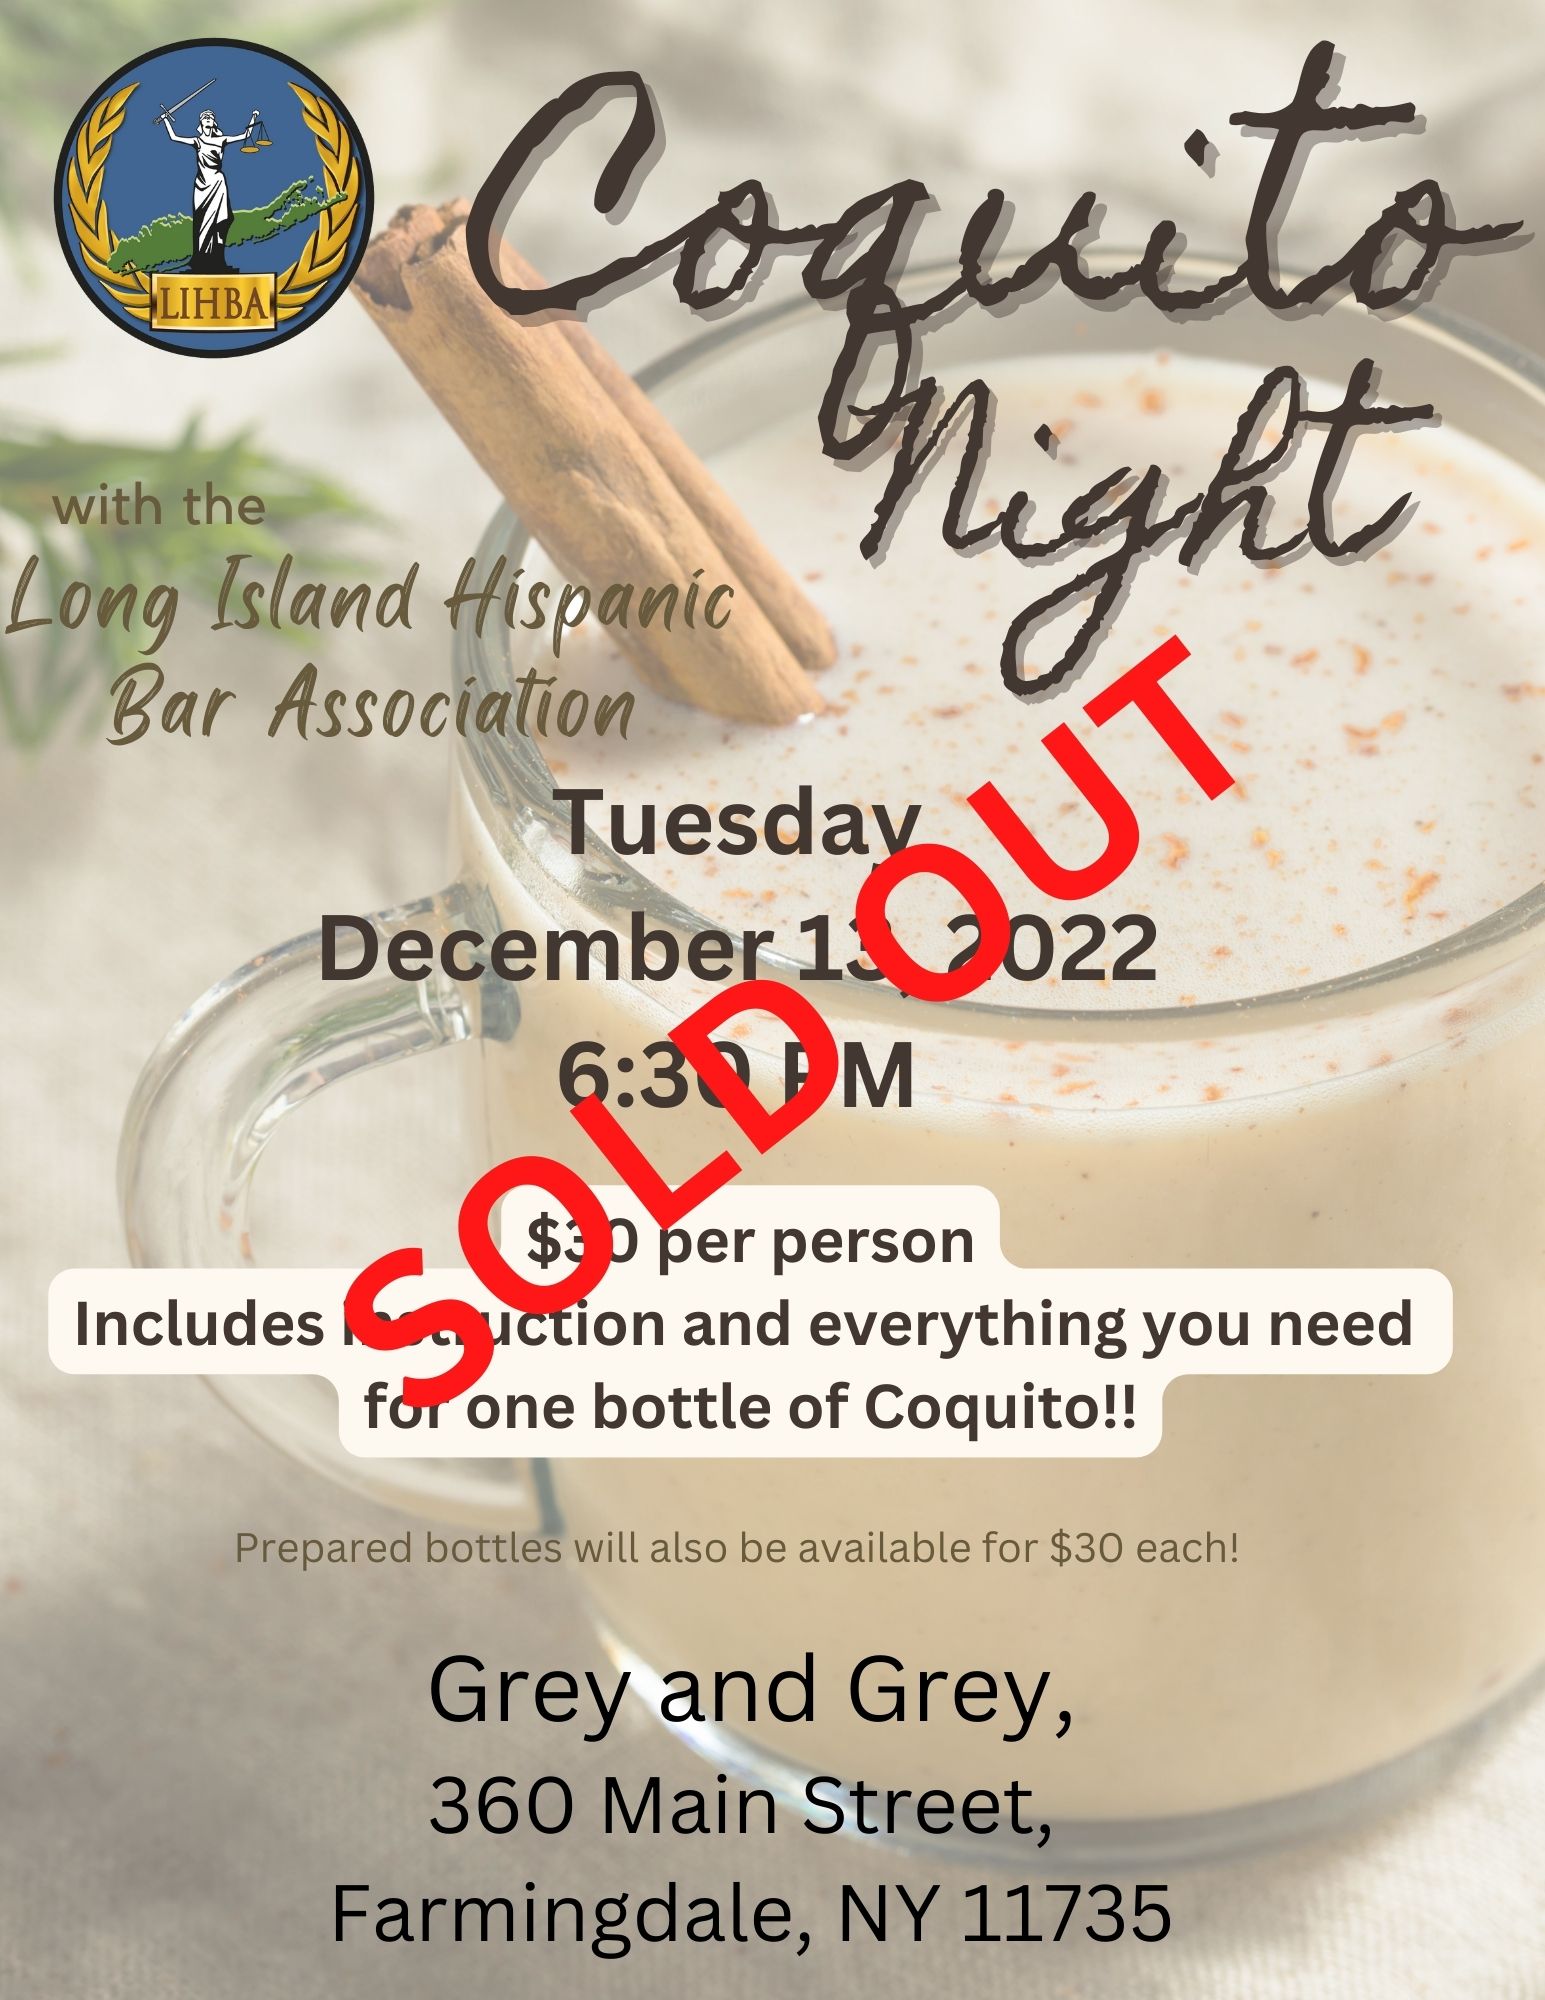 Coquito night Sold out